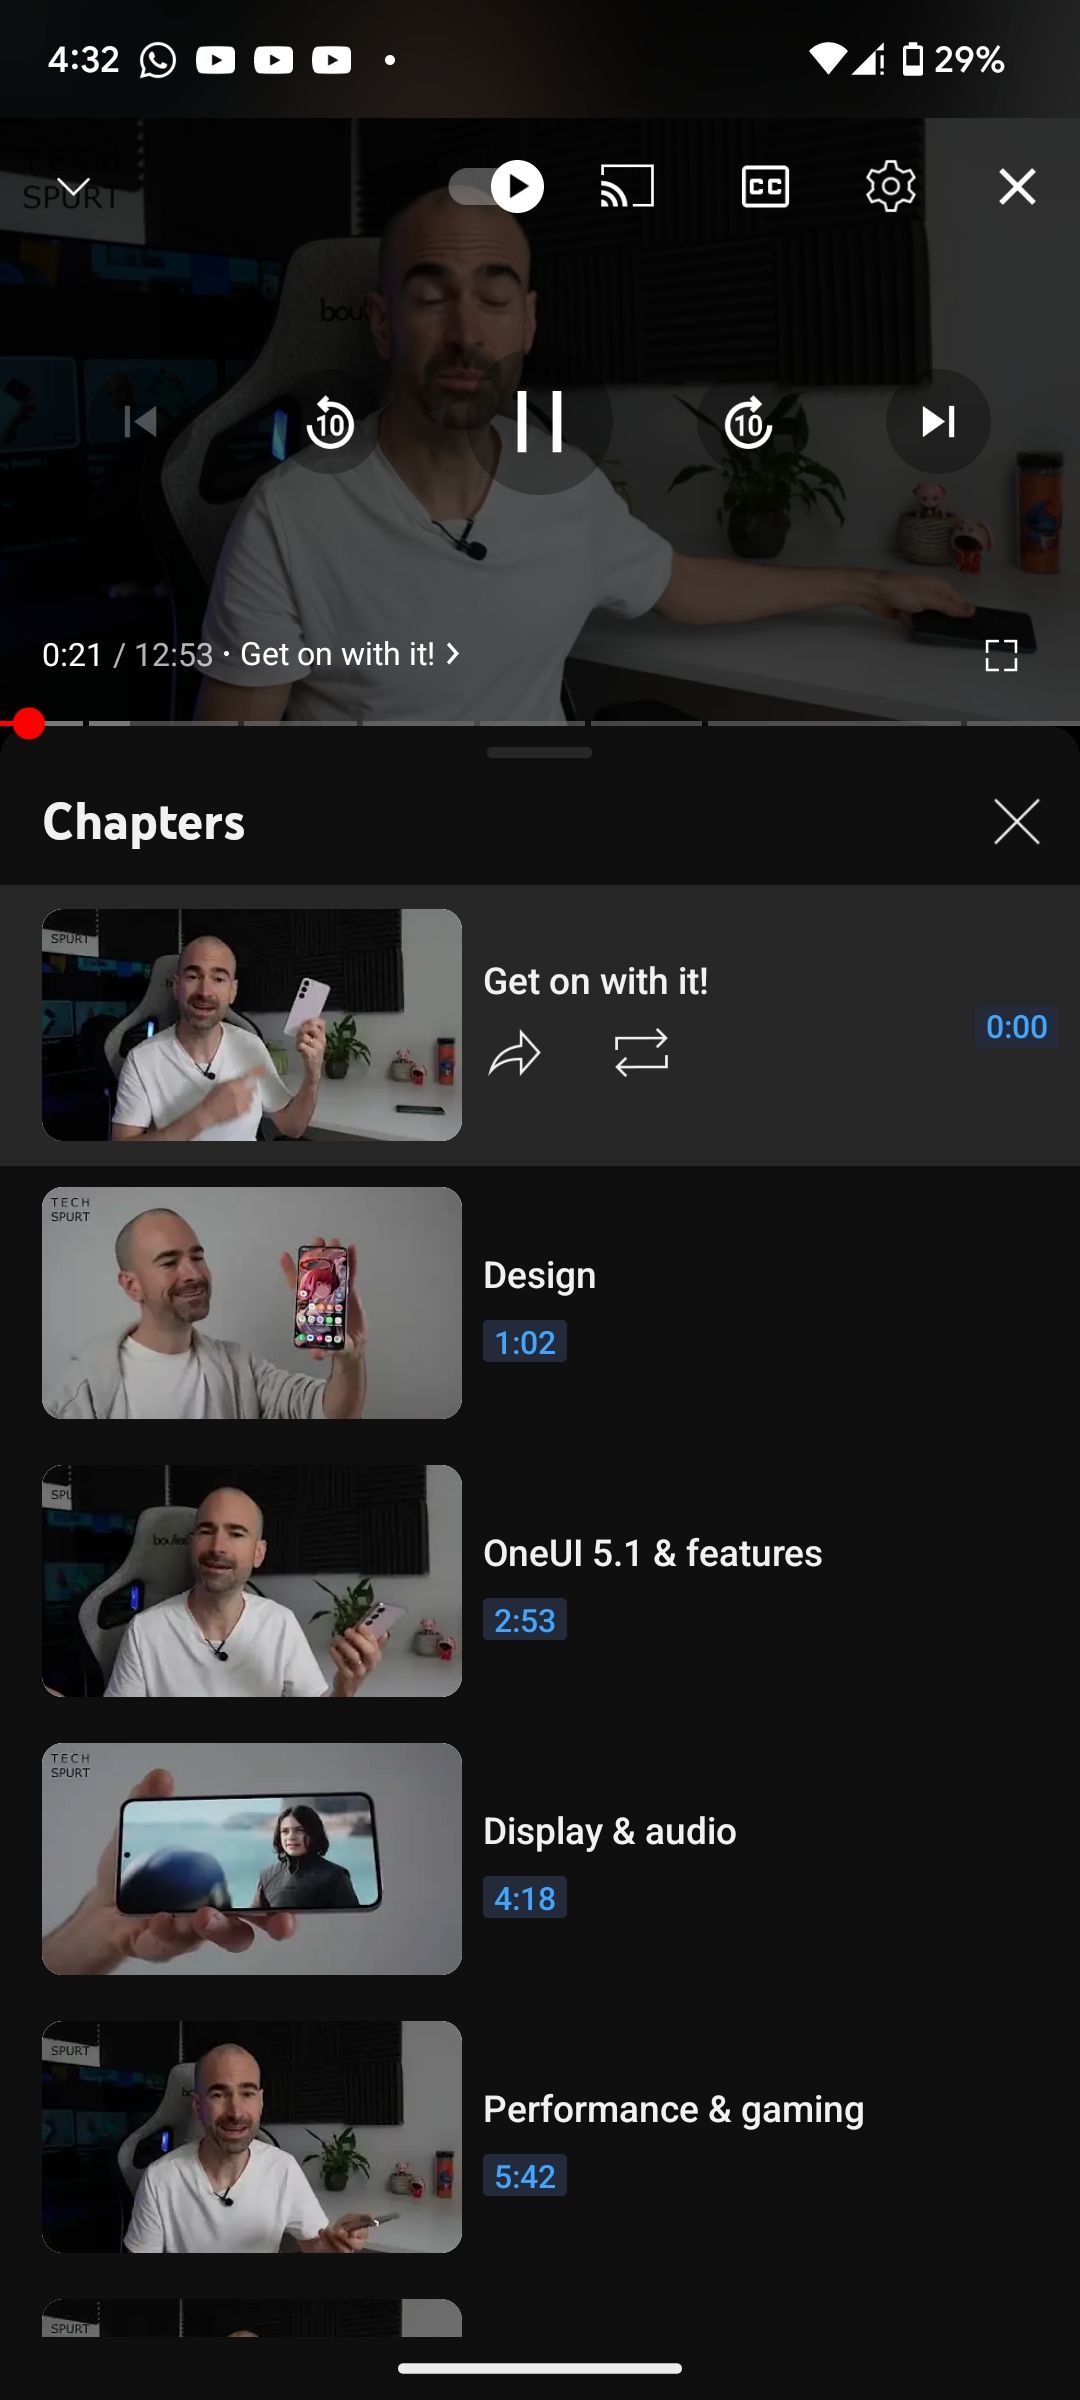 Viewing video chapters on YouTube mobile